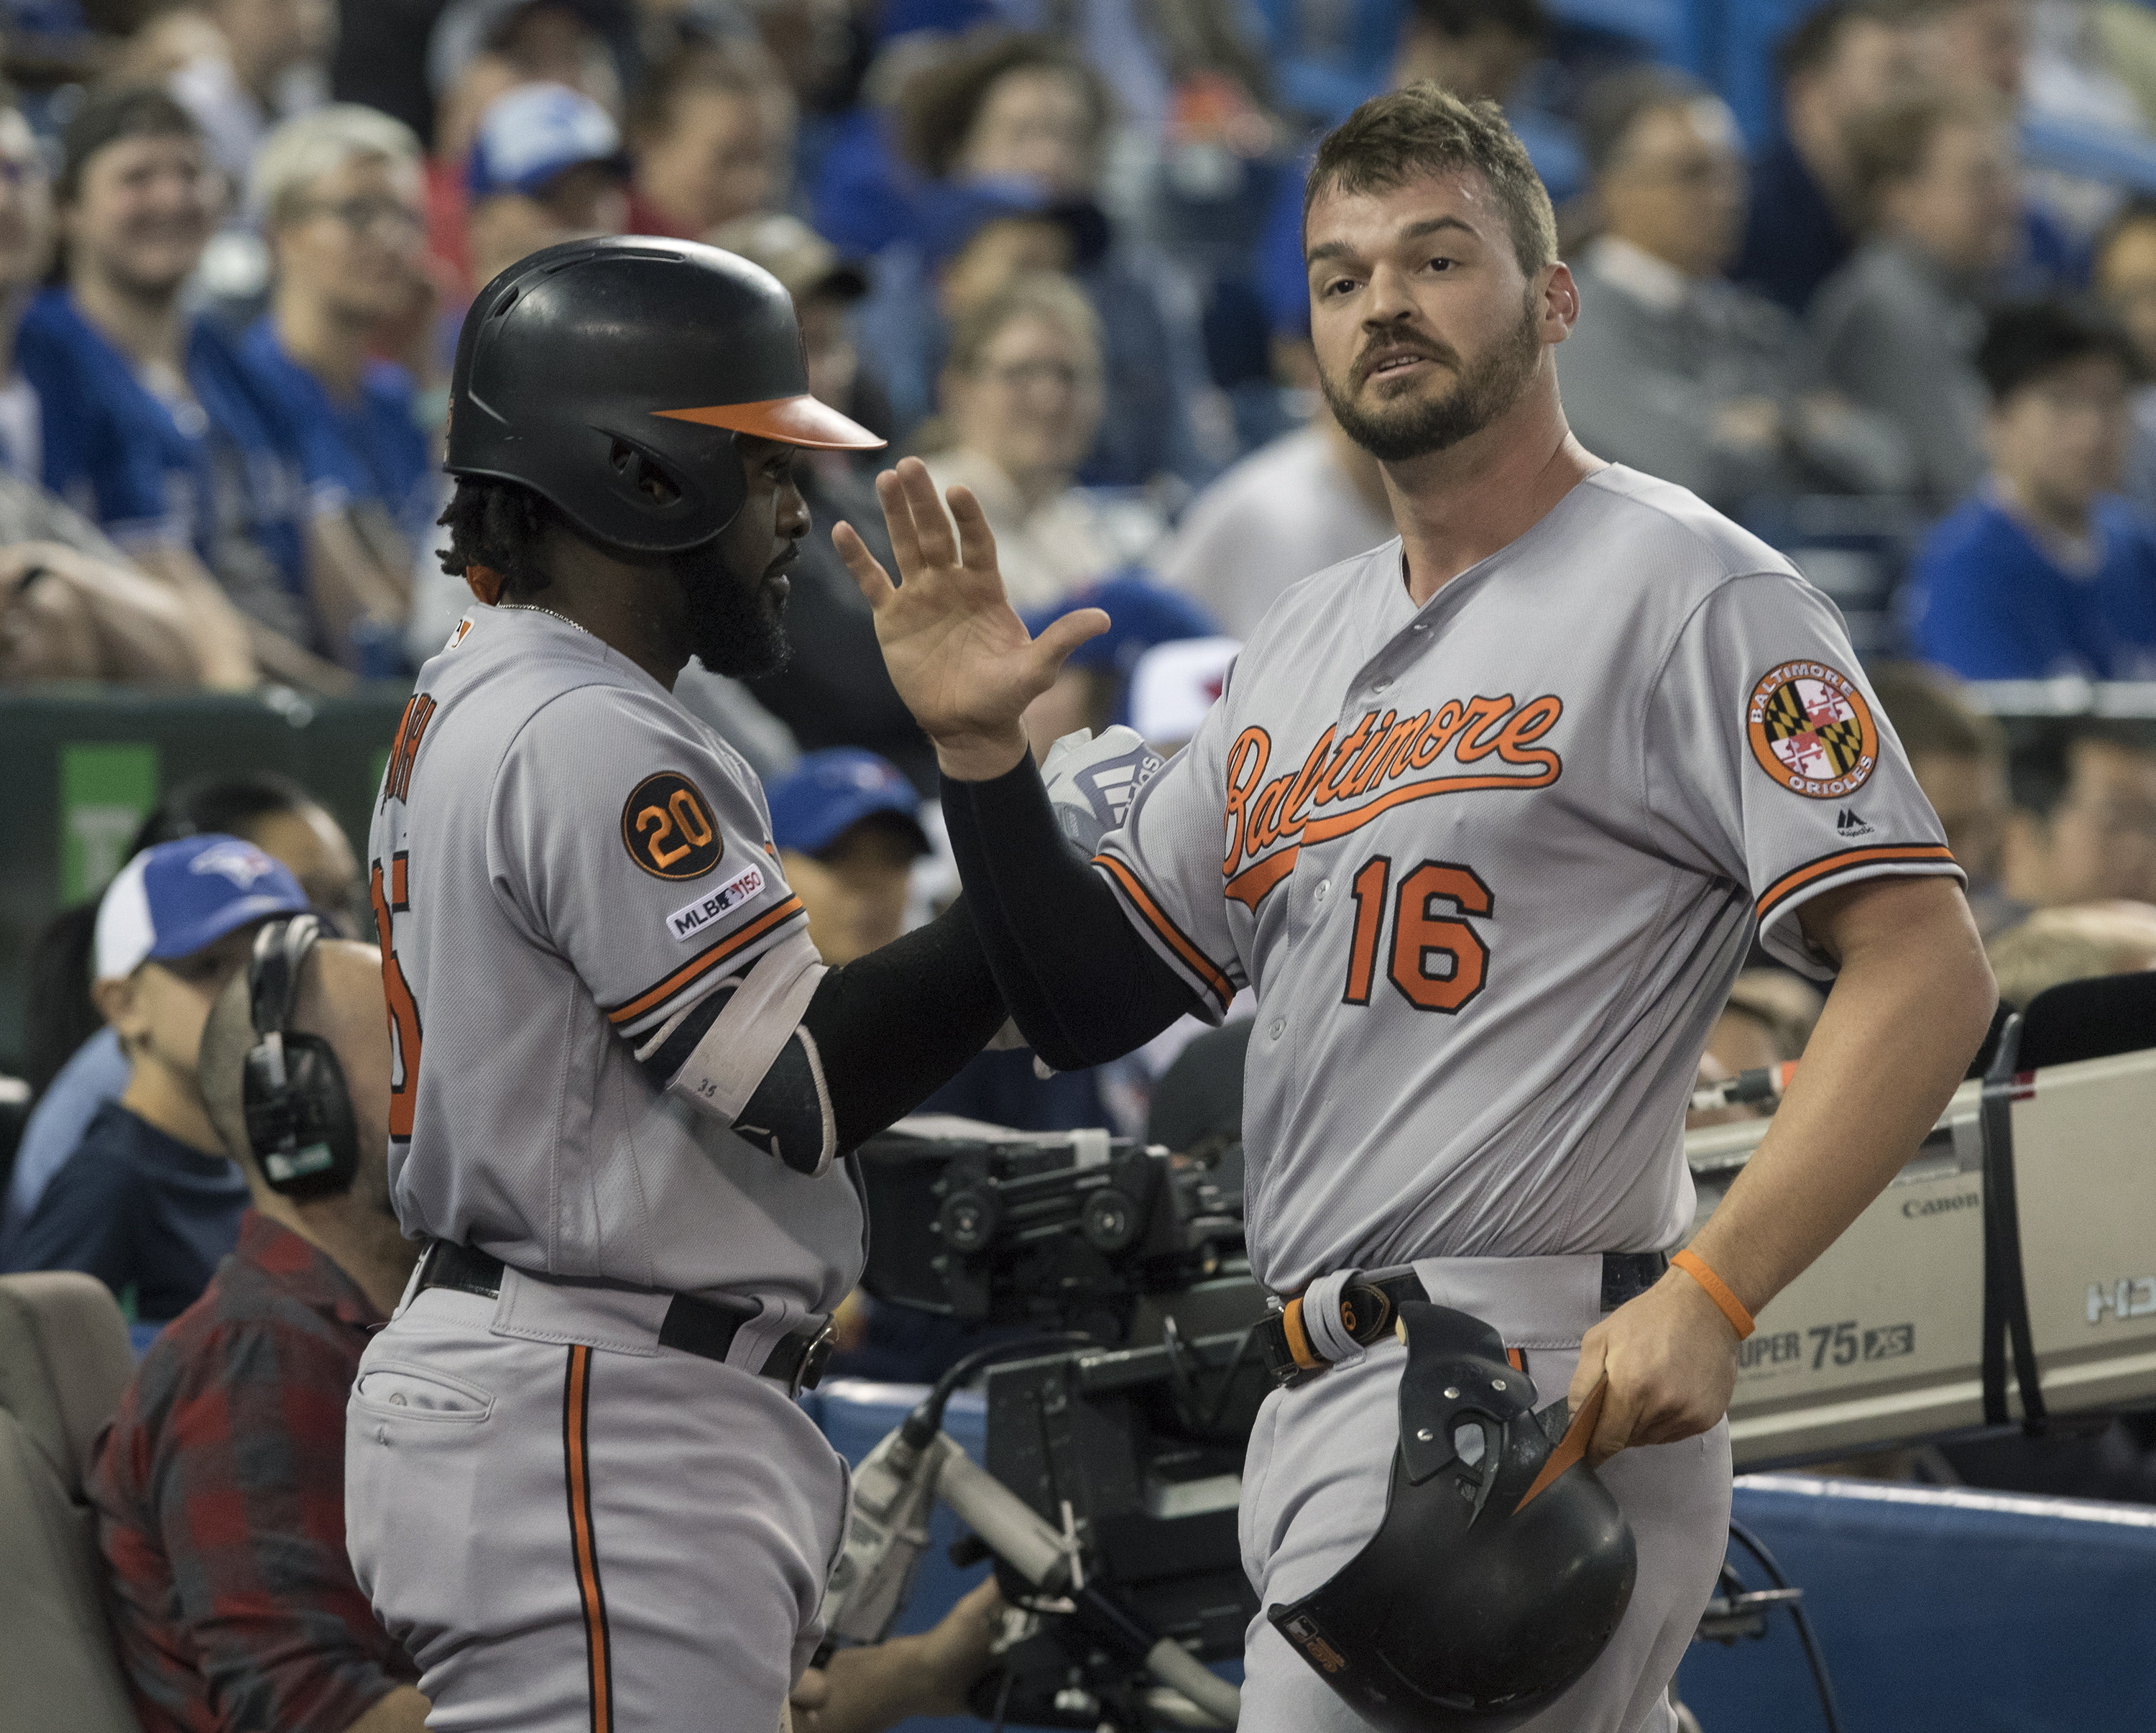 Mancini has career-high 5 hits, Orioles rout Blue Jays 11-4